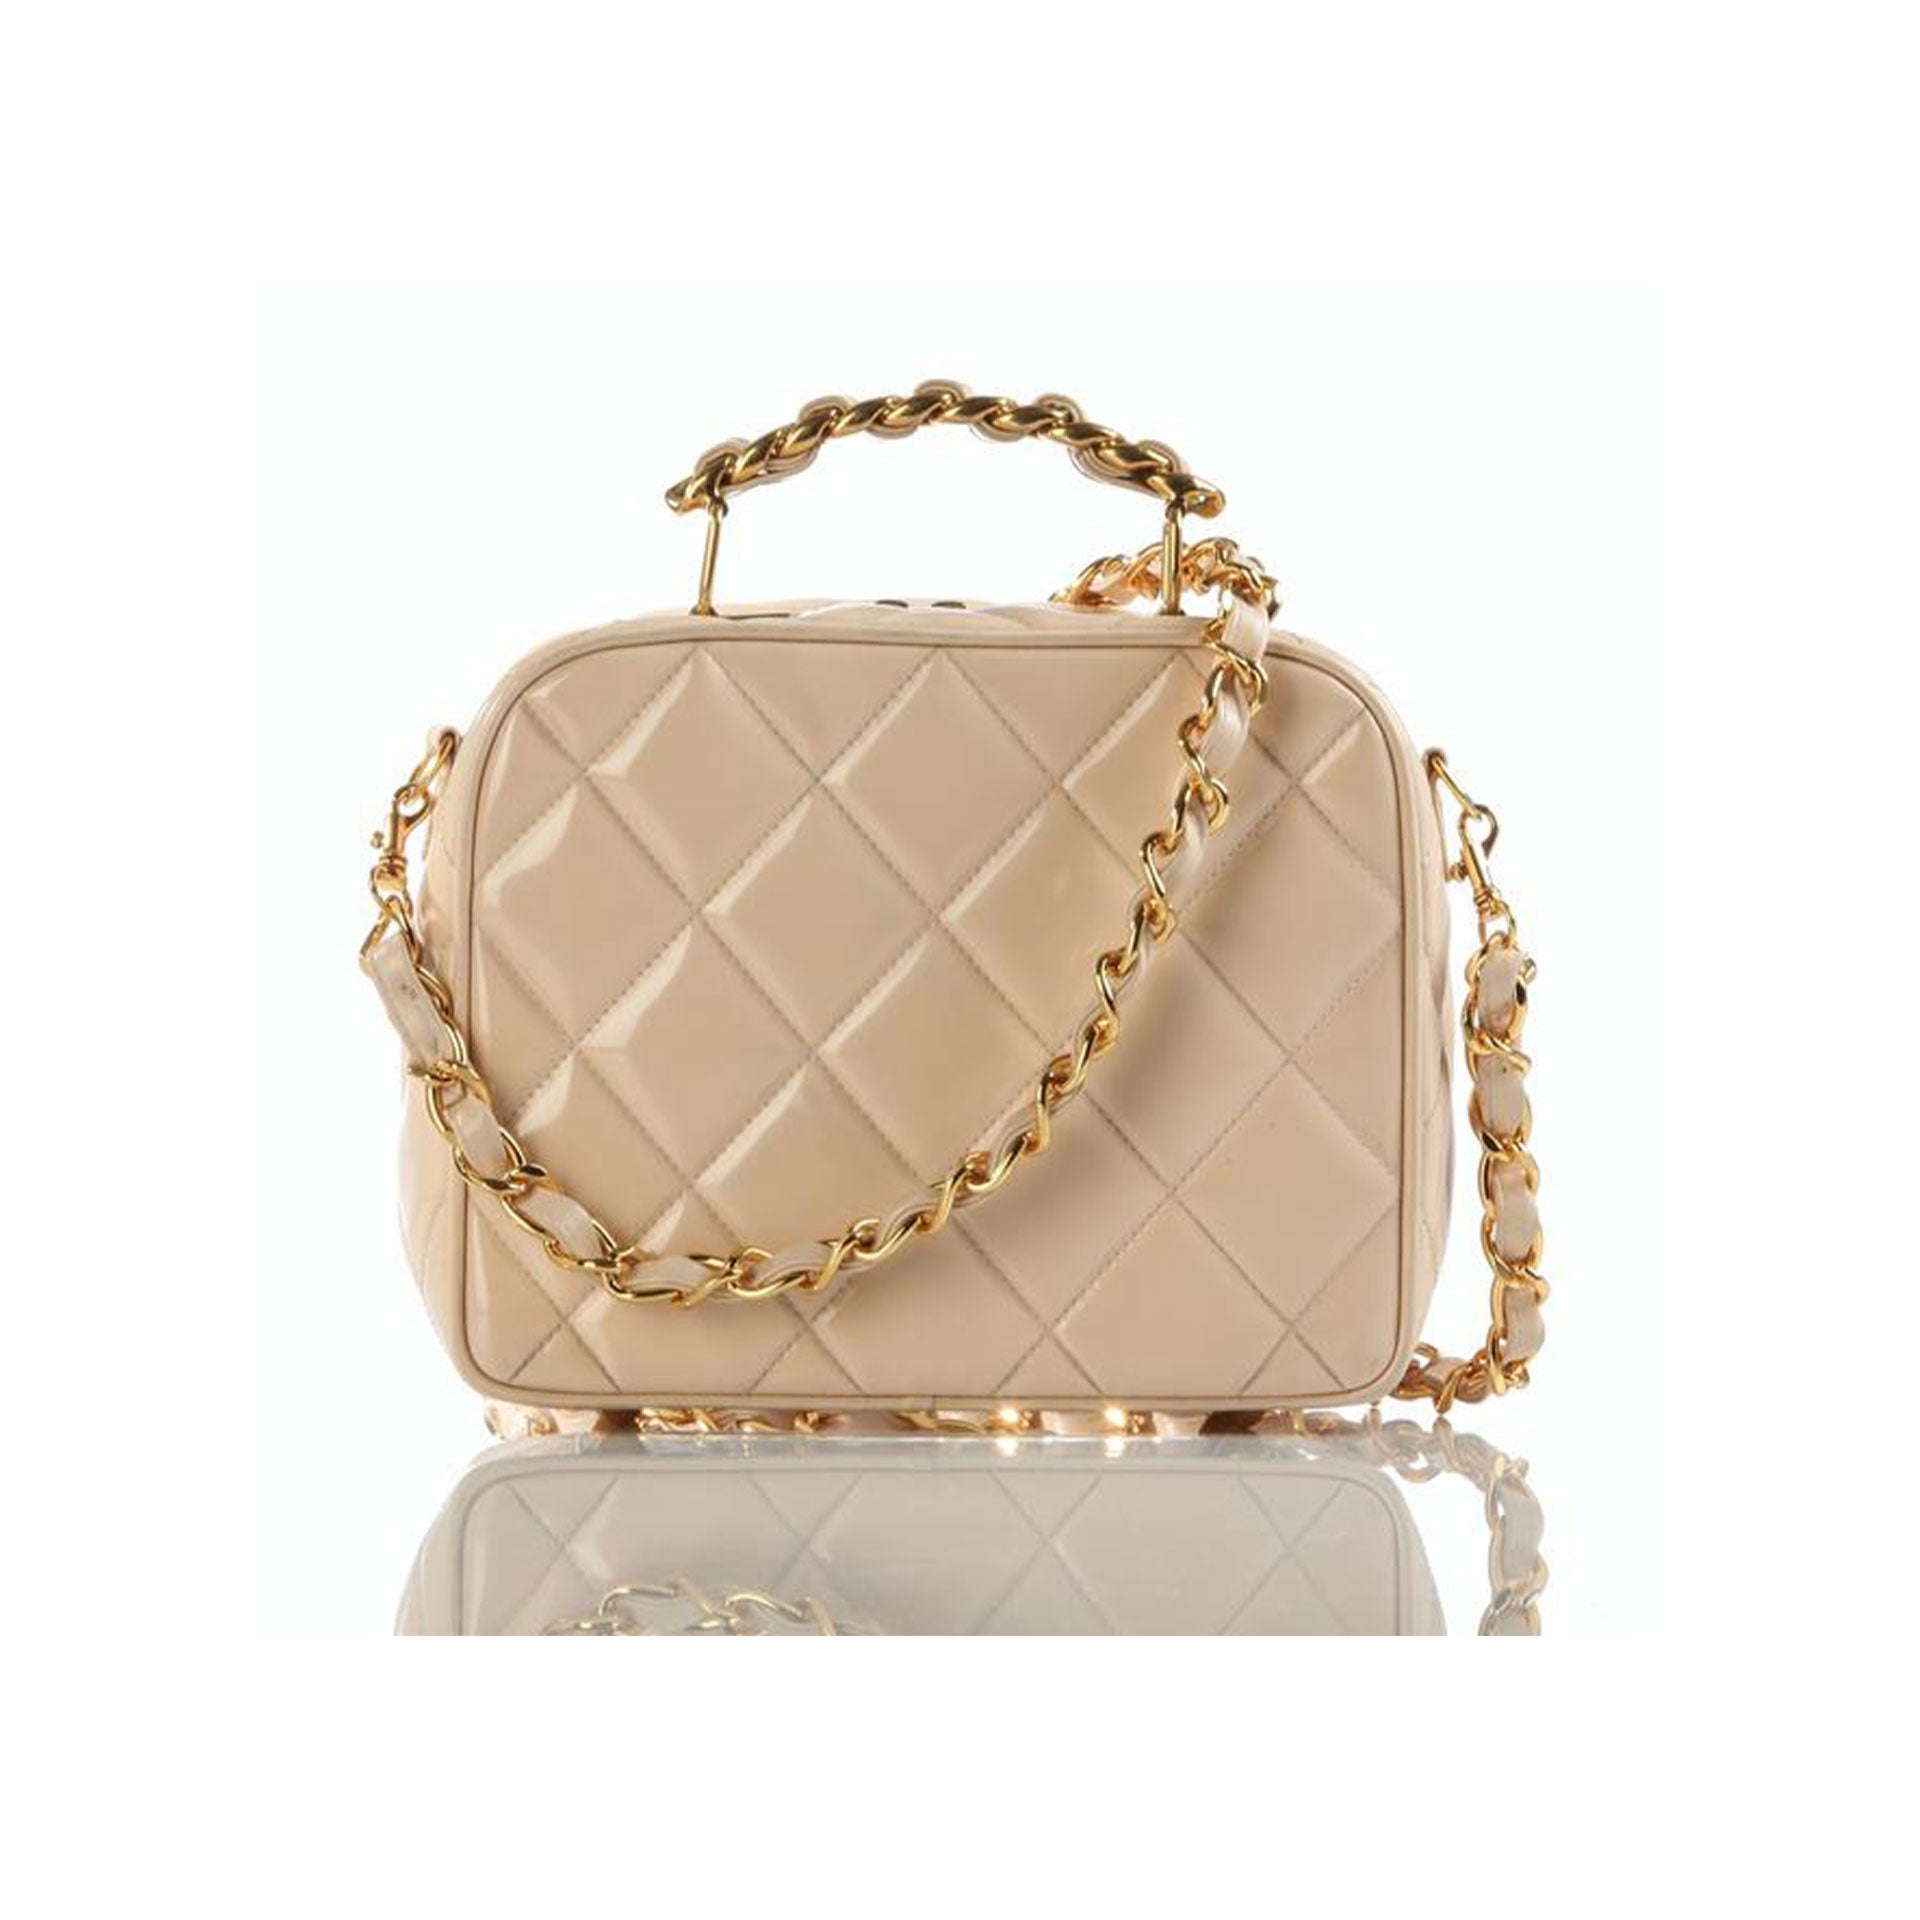 Chanel Pink Quilted Lambskin Leather Pearl Crush Camera Crossbody Bag   Yoogis Closet